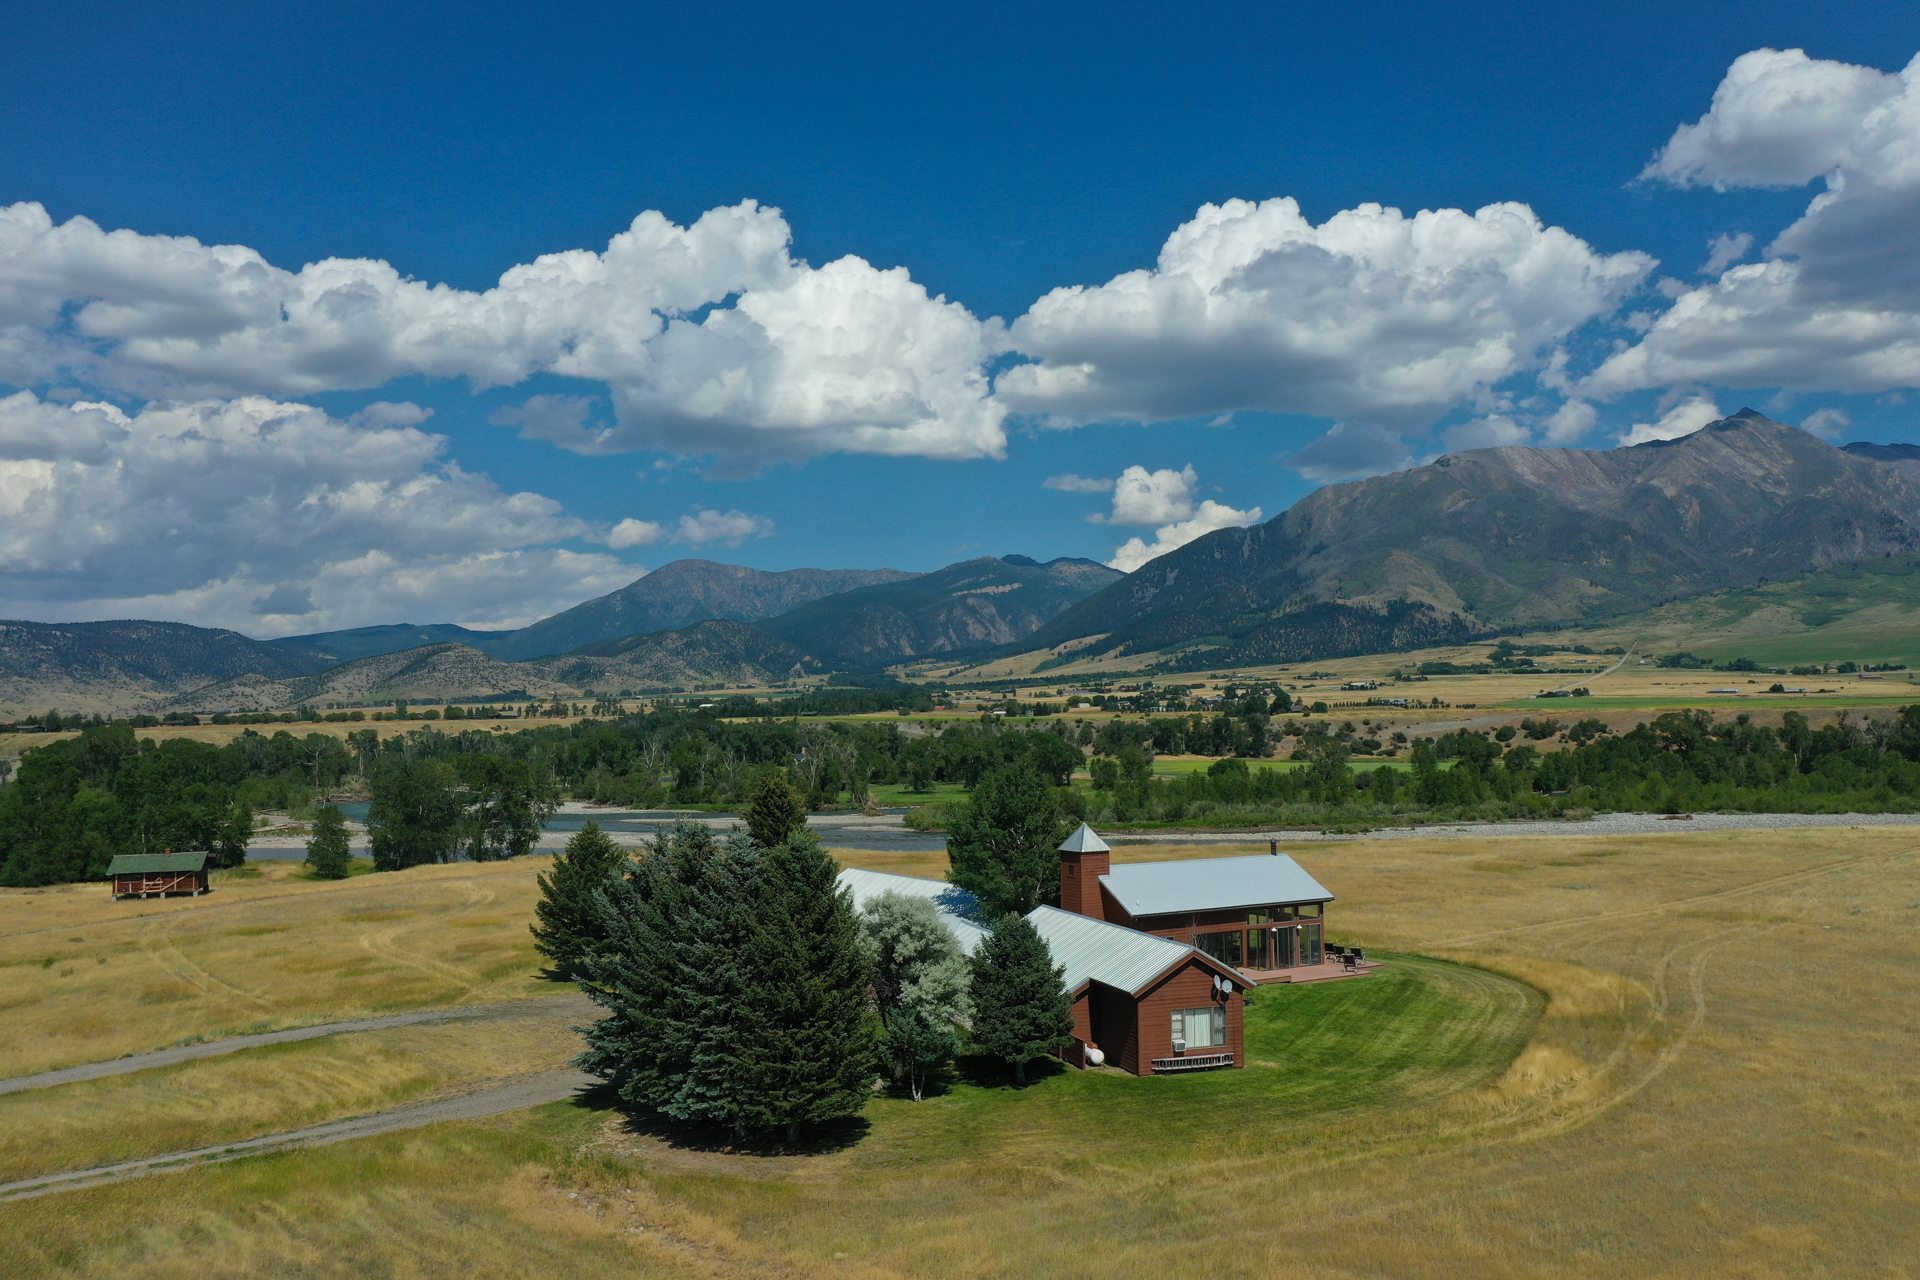 The O'Hair Lodge in Paradise Valley, MT, where Rory and Indy stay for a month each year.